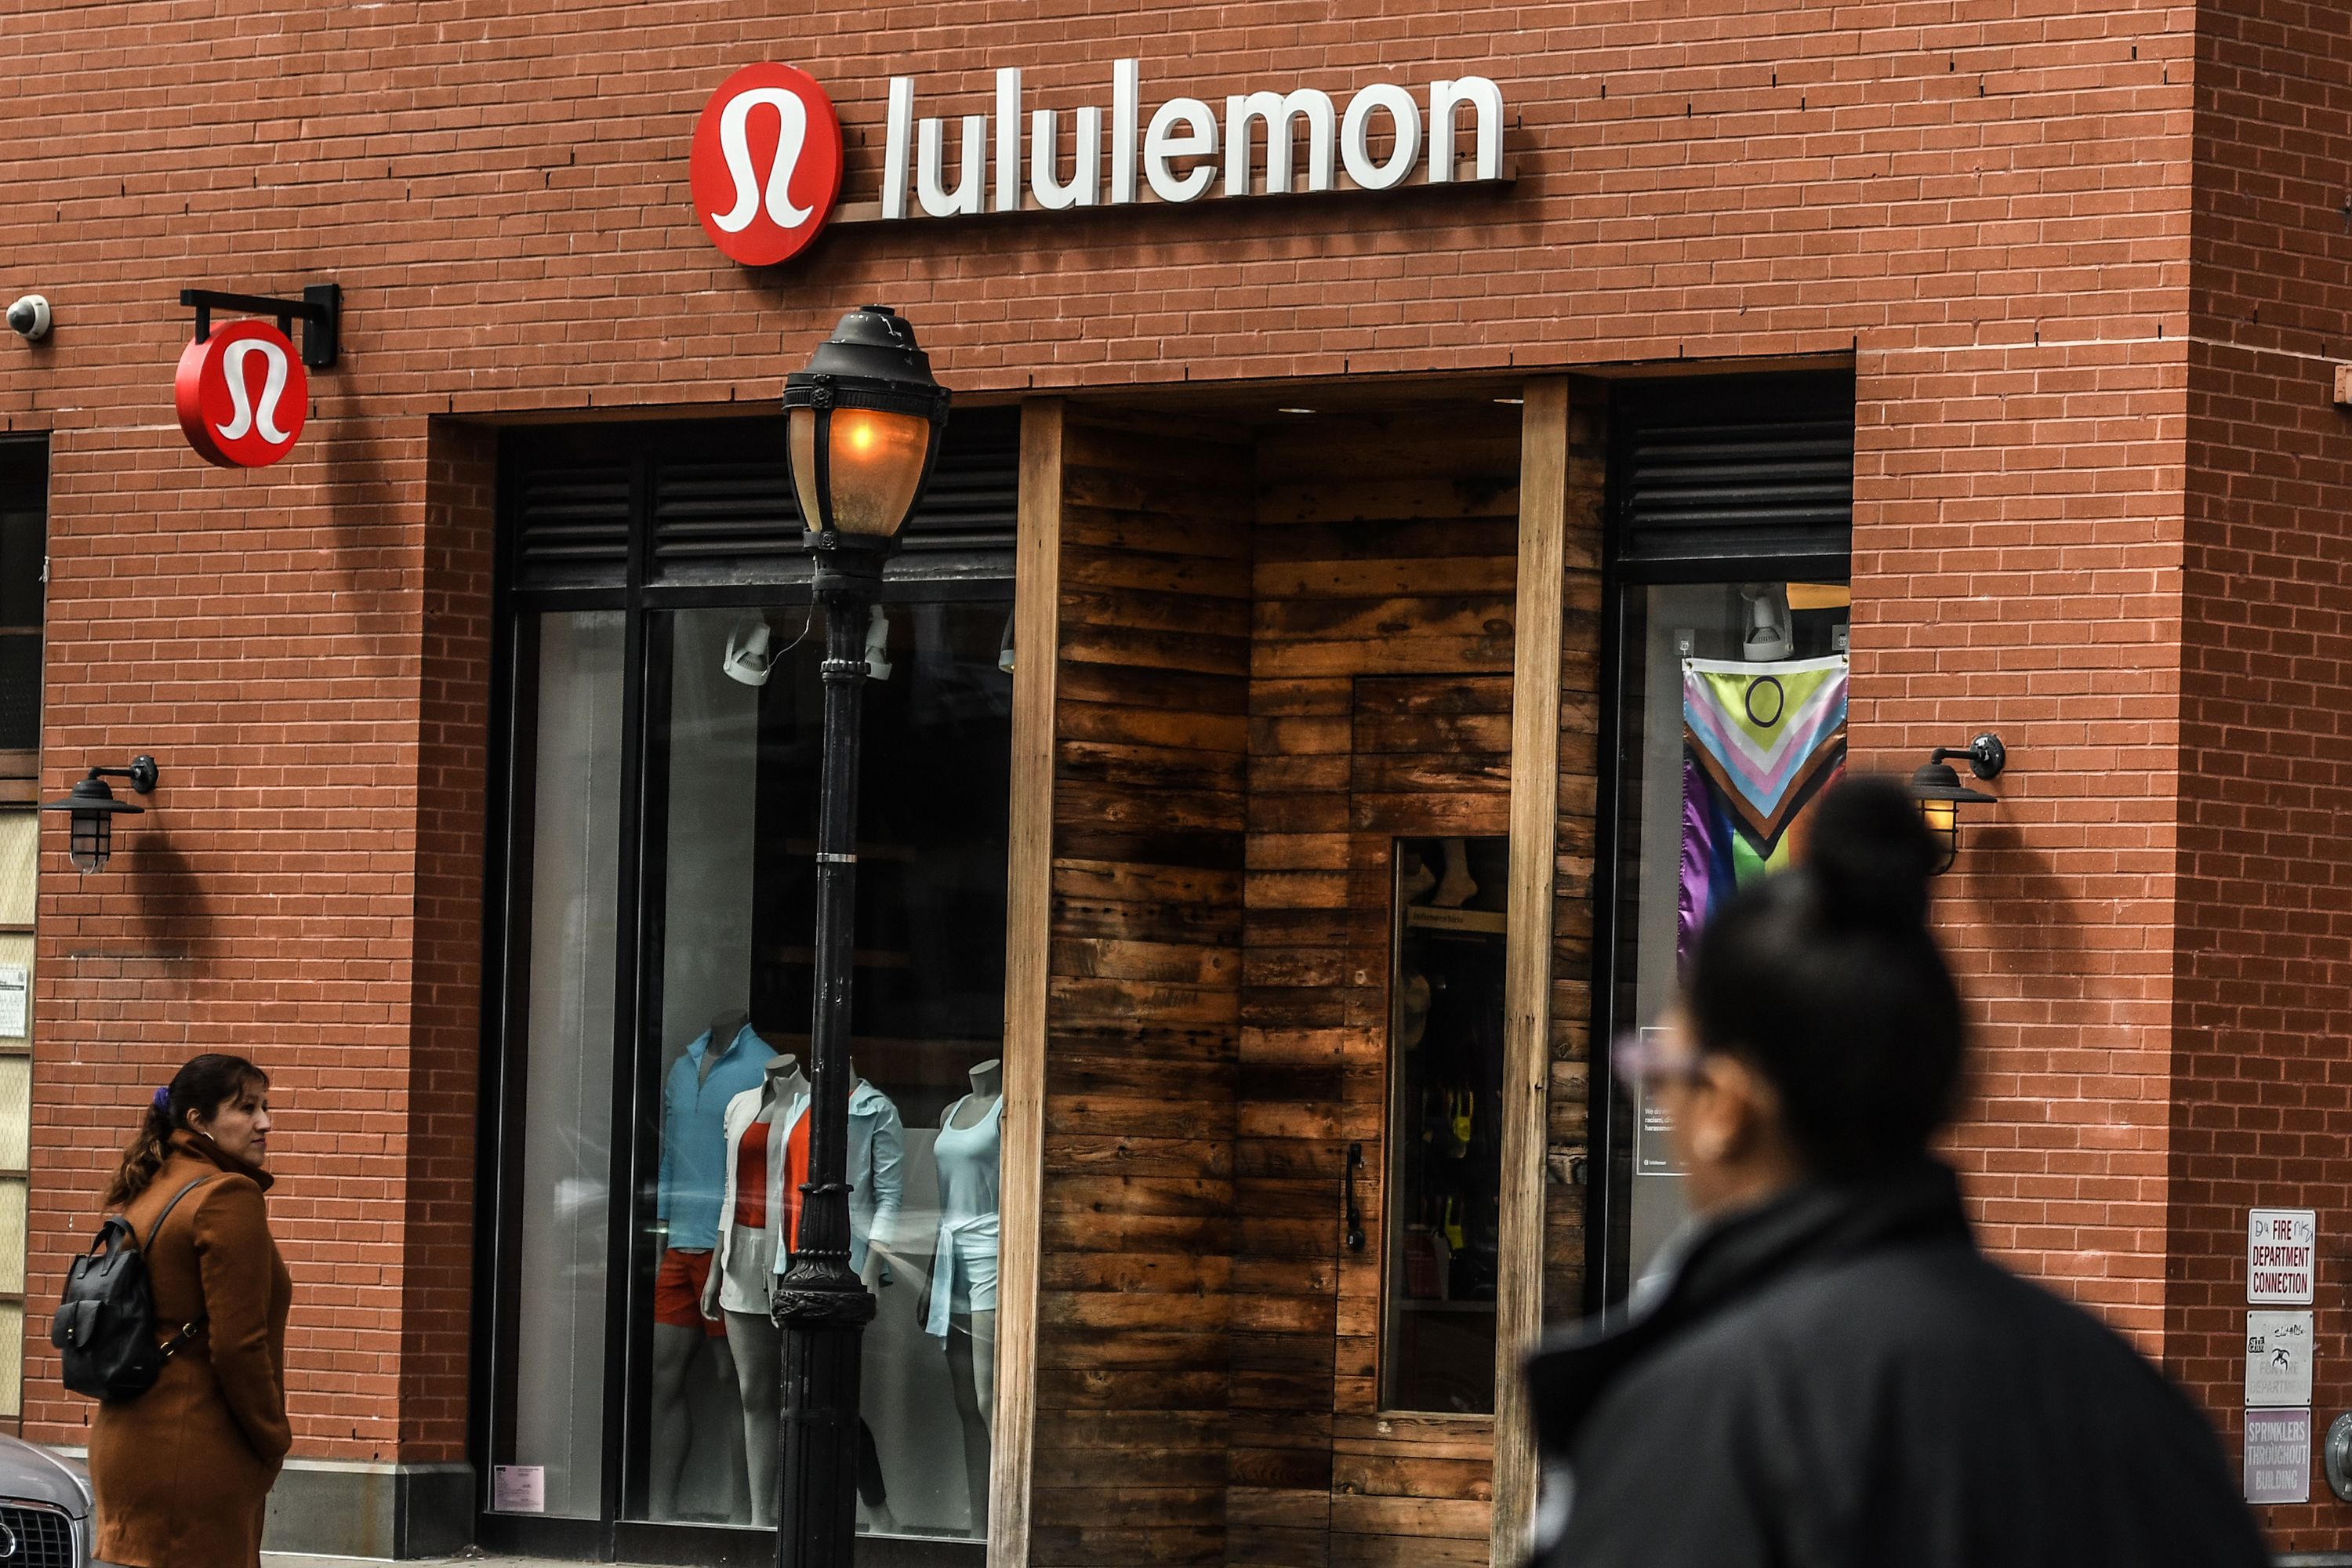 Lululemon Just Brought Back One Of Its Most-Requested Styles